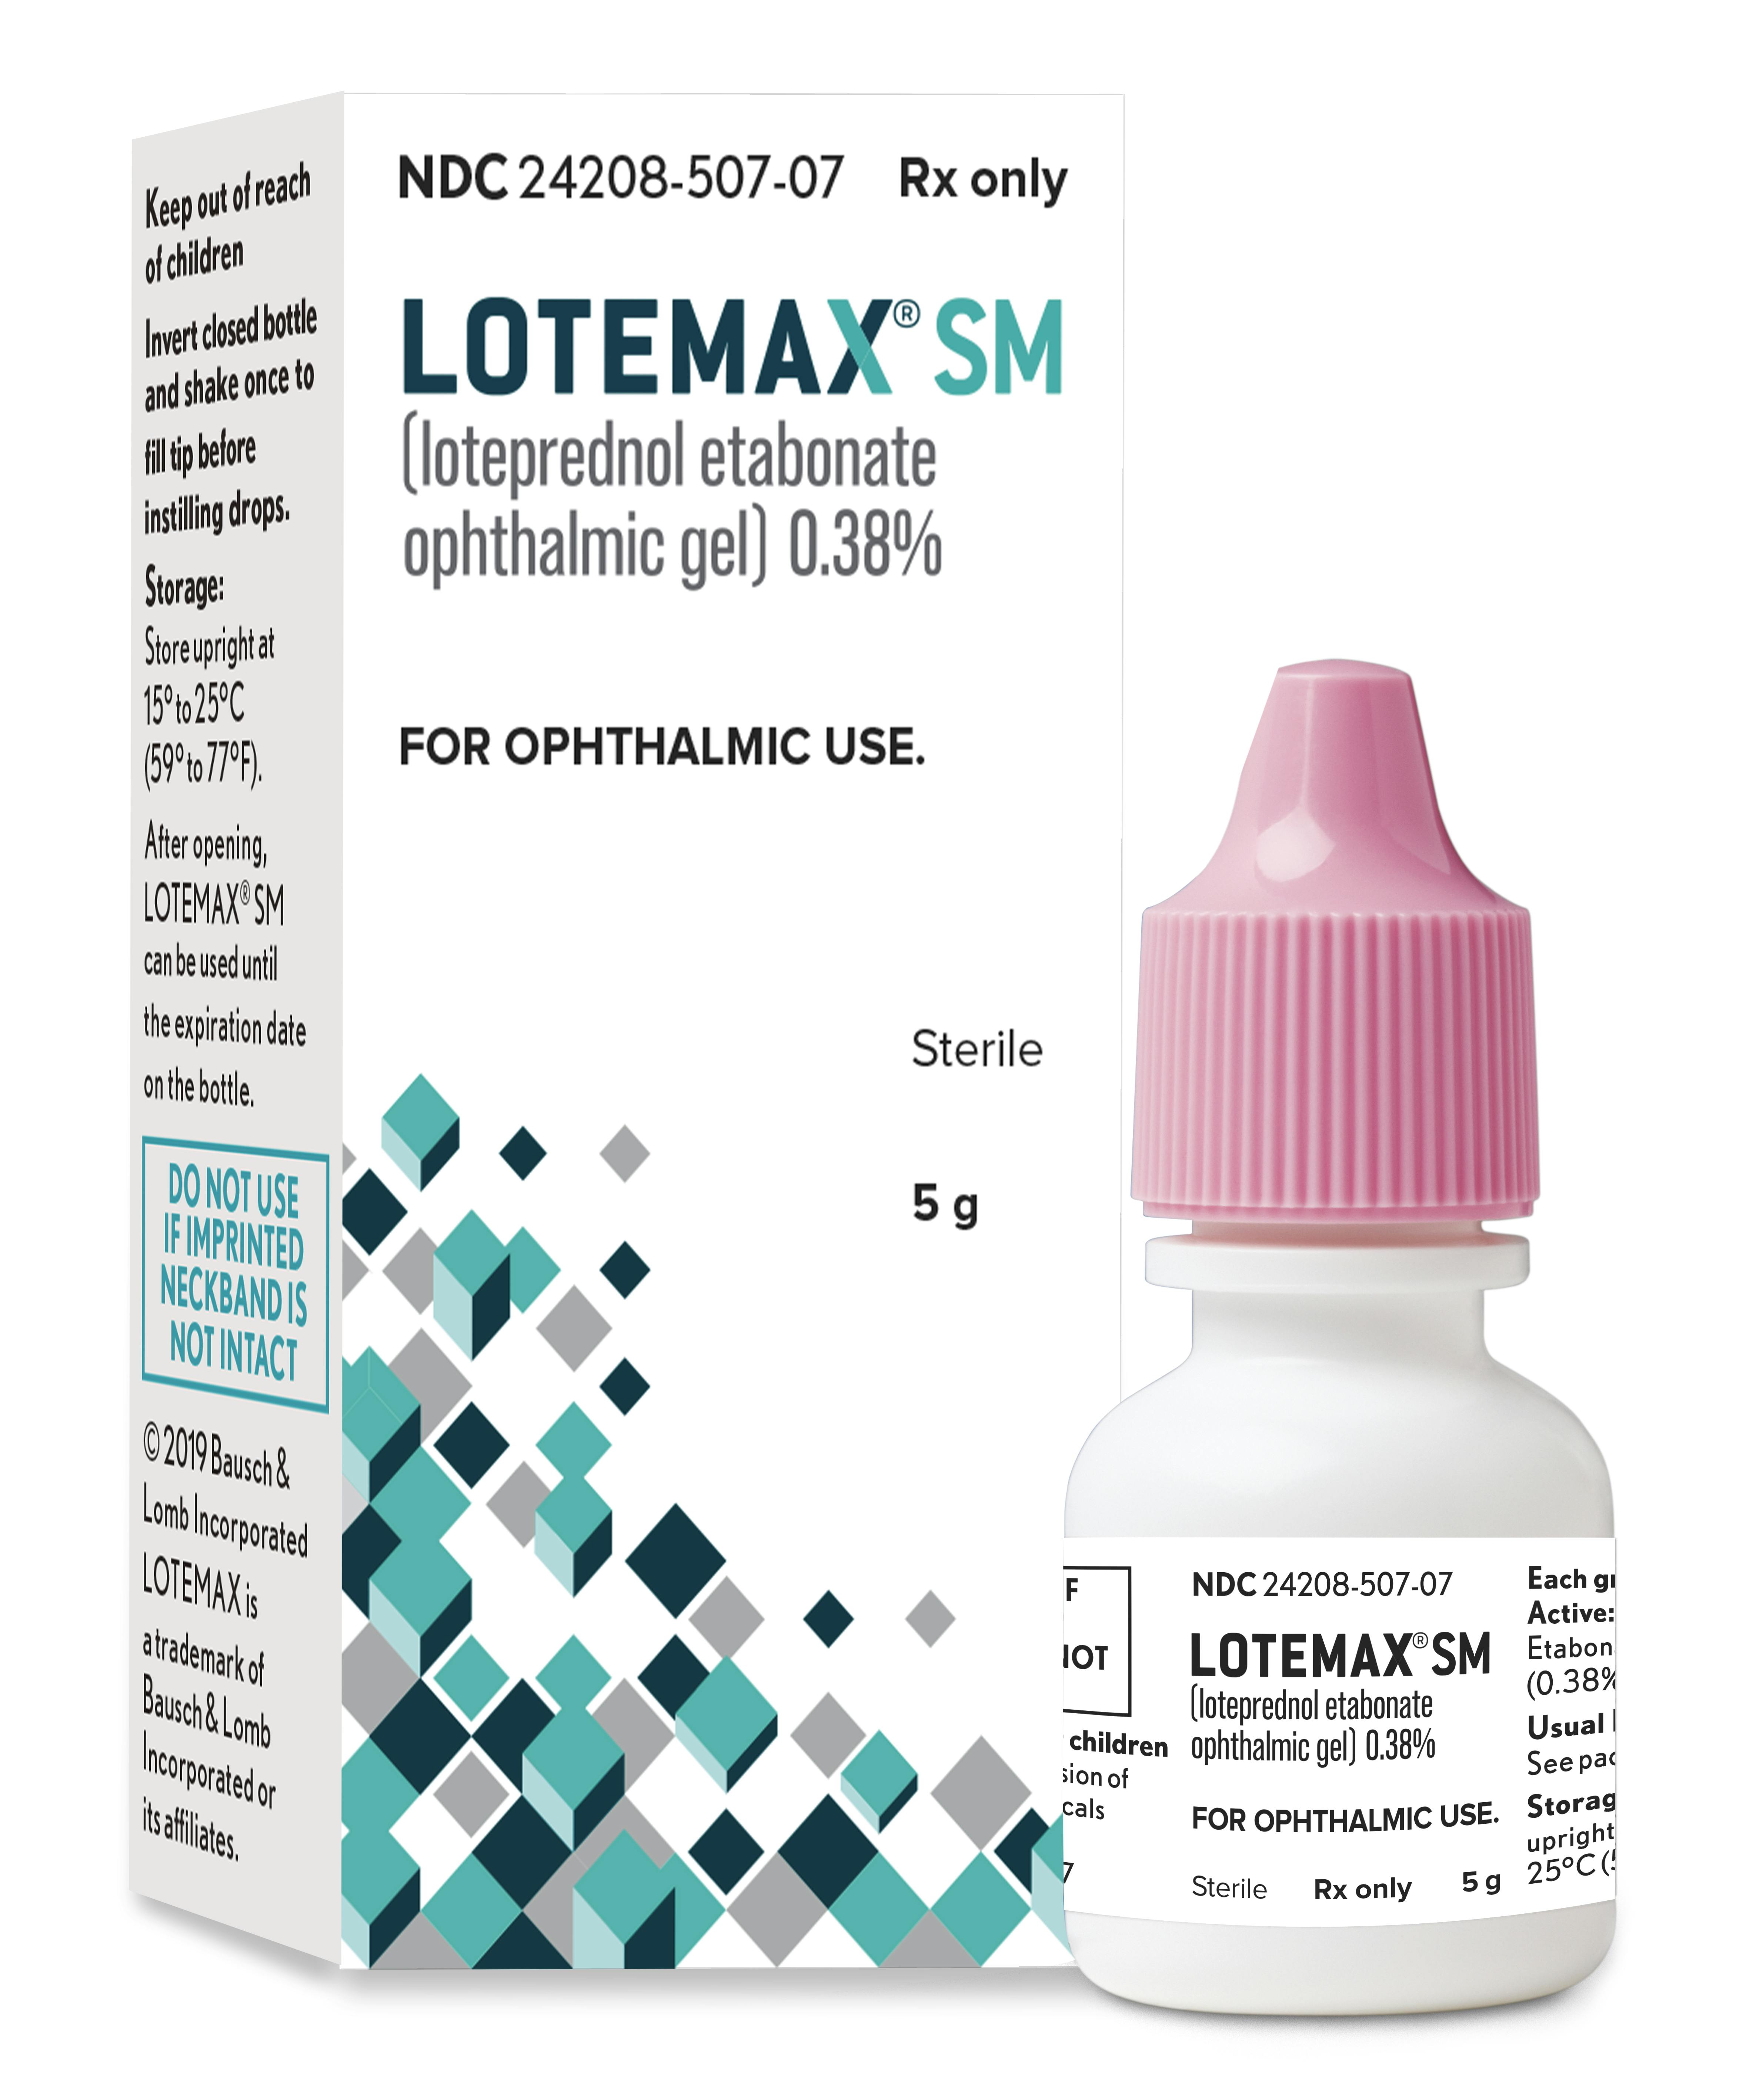 bausch-lomb-announces-us-launch-of-lotemax-sm-eyewire